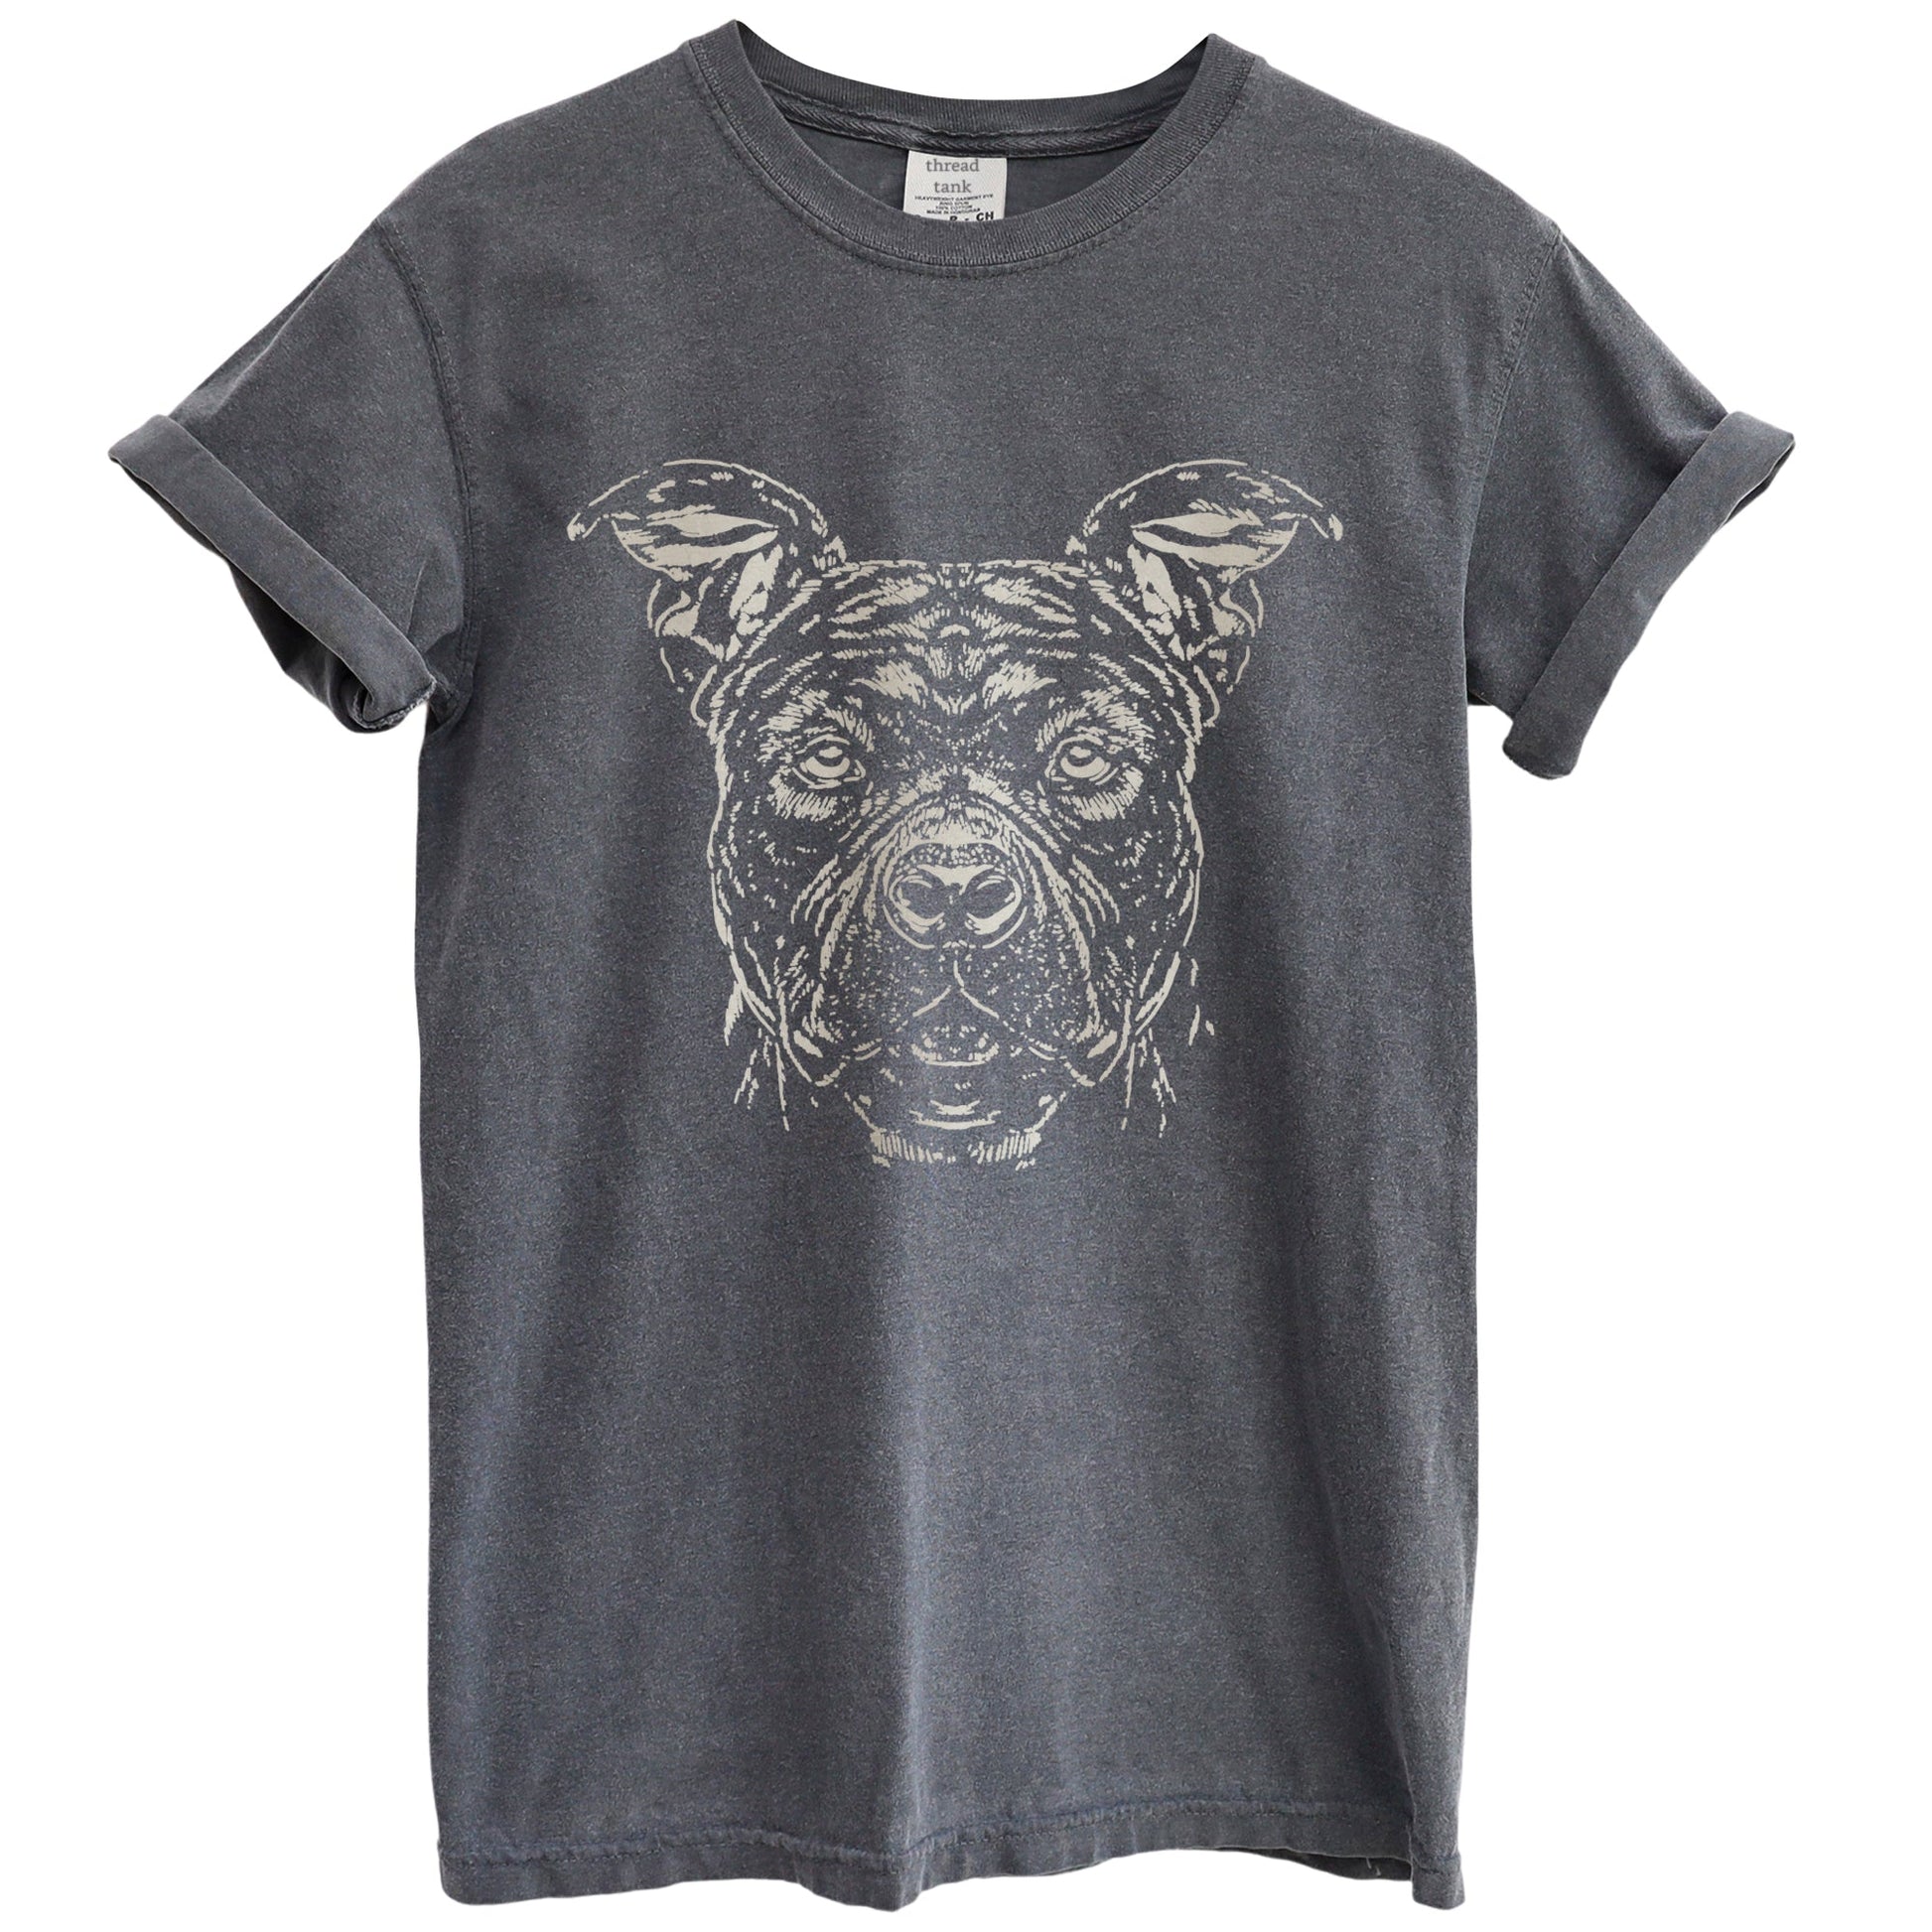 Staffordshire Dog Sketch Garment-Dyed Tee - Stories You Can Wear